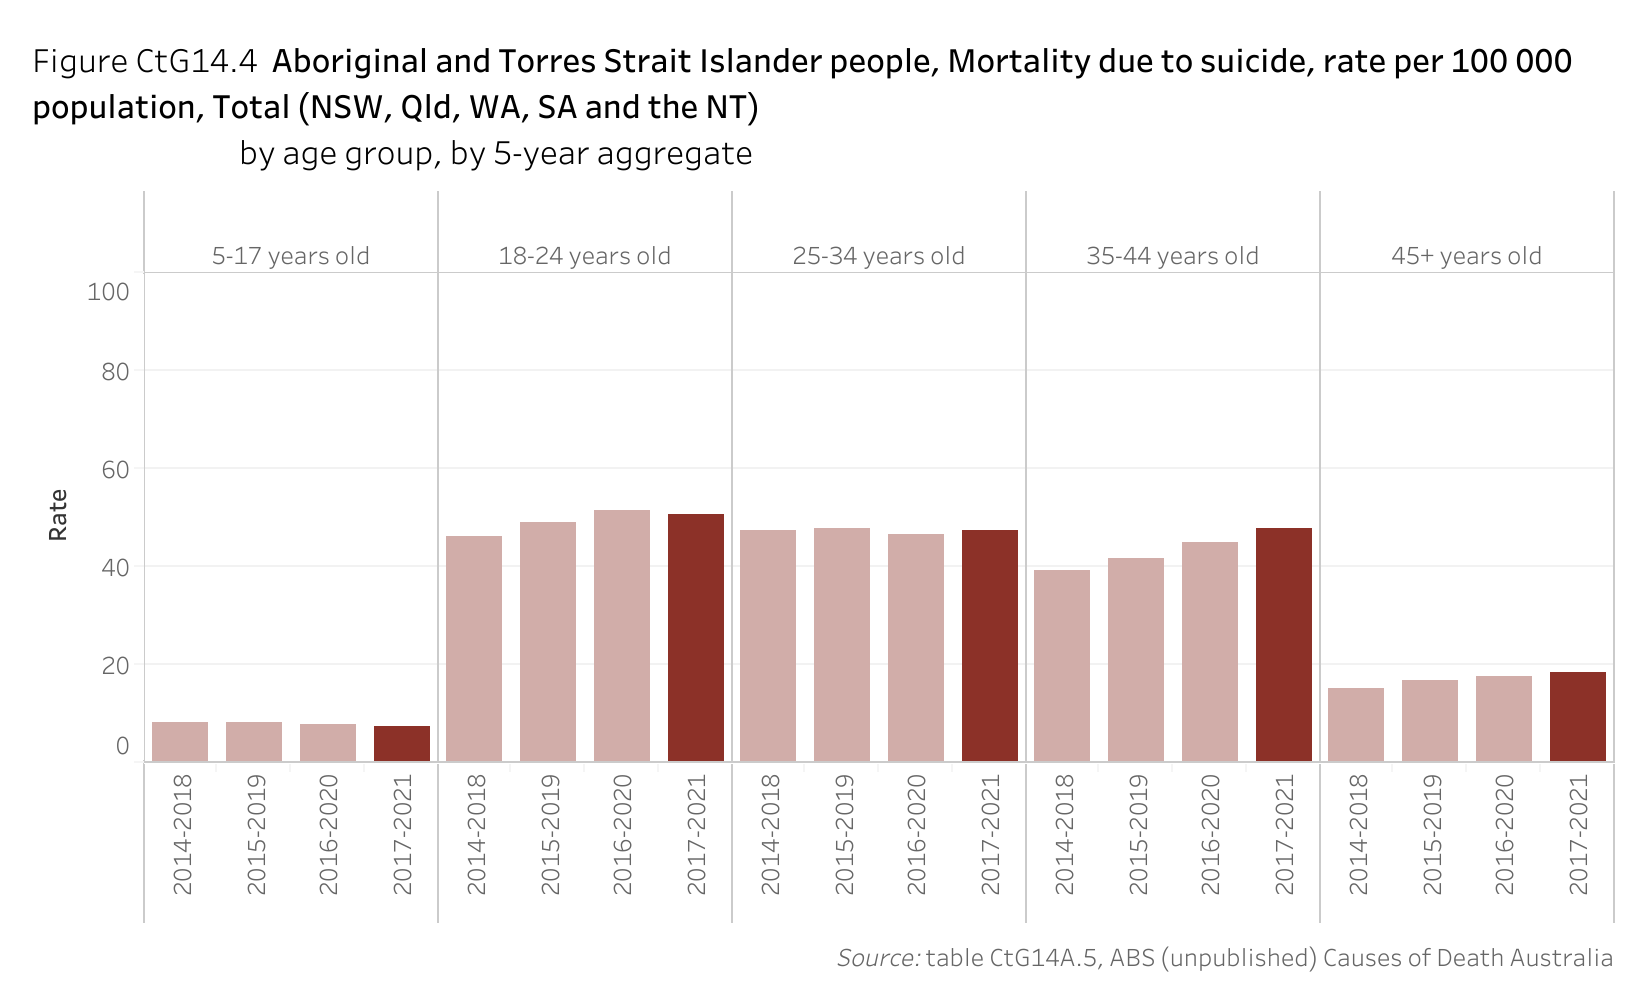 Figure CtG14.4 shows Aboriginal and Torres Strait Islander people, Mortality due to suicide, rate per 100 000 population, Total (New South Wales, Queensland, Western Australia, South Australia and the Northern Territory), by age group, by 5-year aggregate. More details can be found within the text near this image.